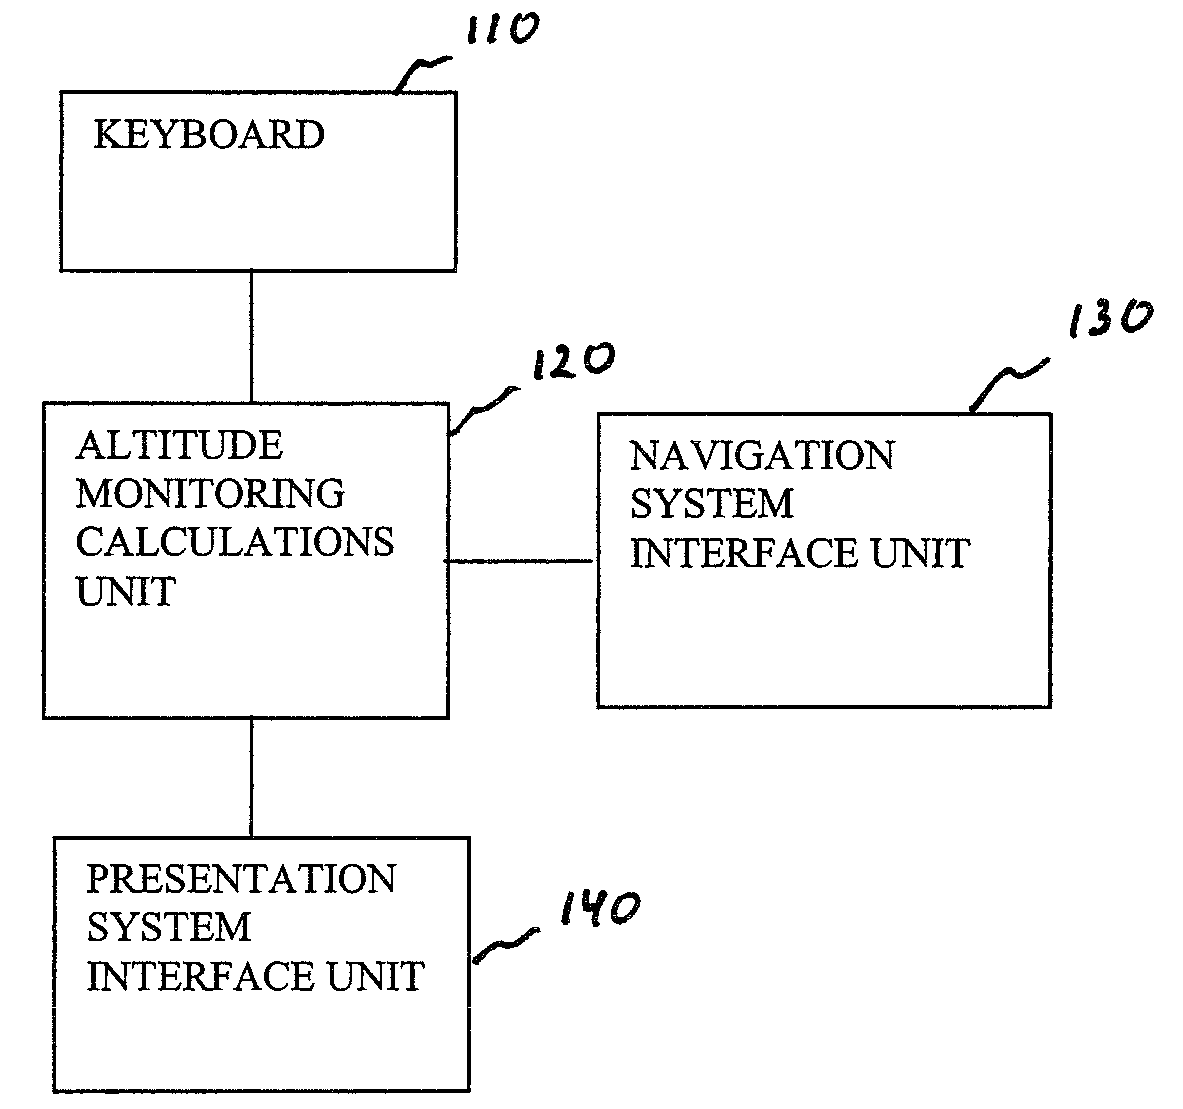 Altitude monitoring system for aircraft